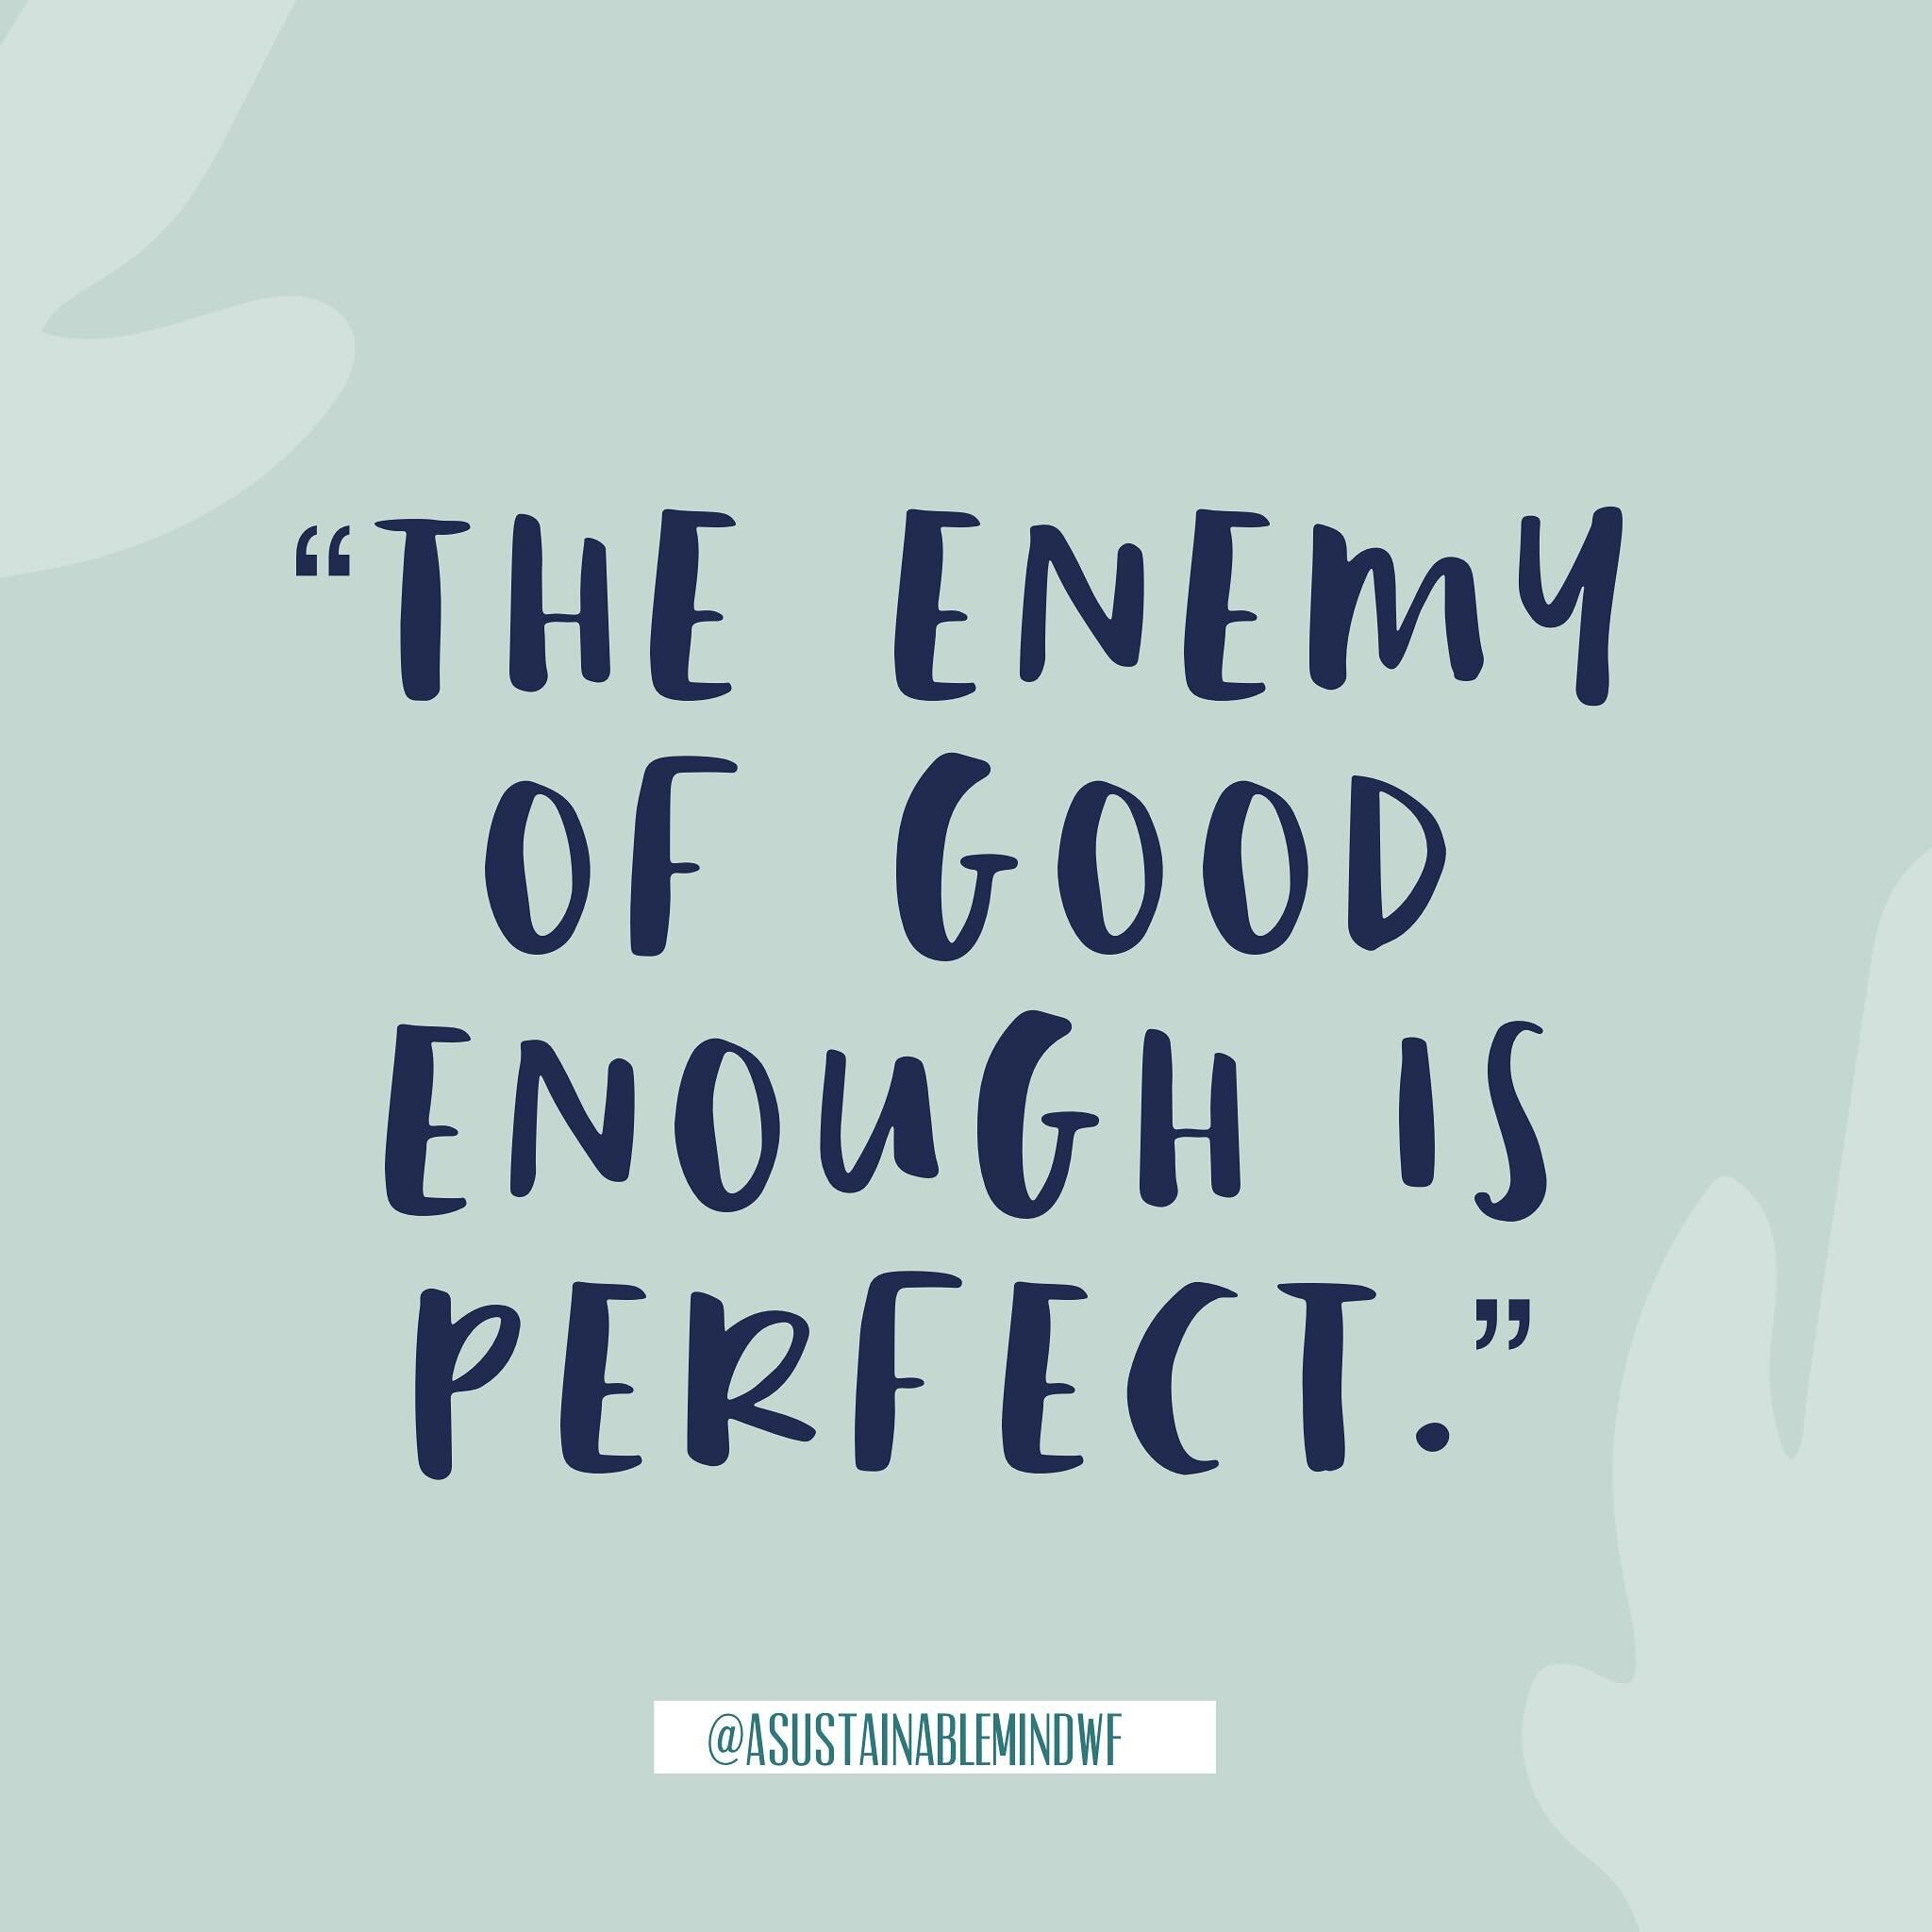 One of our favorite quotes at @asustainablemindwf.  We can easily get so caught up in trying to make things perfect that we don&rsquo;t see all the good we are doing or all the good things around us. Perfection is not possible but giving yourself cre